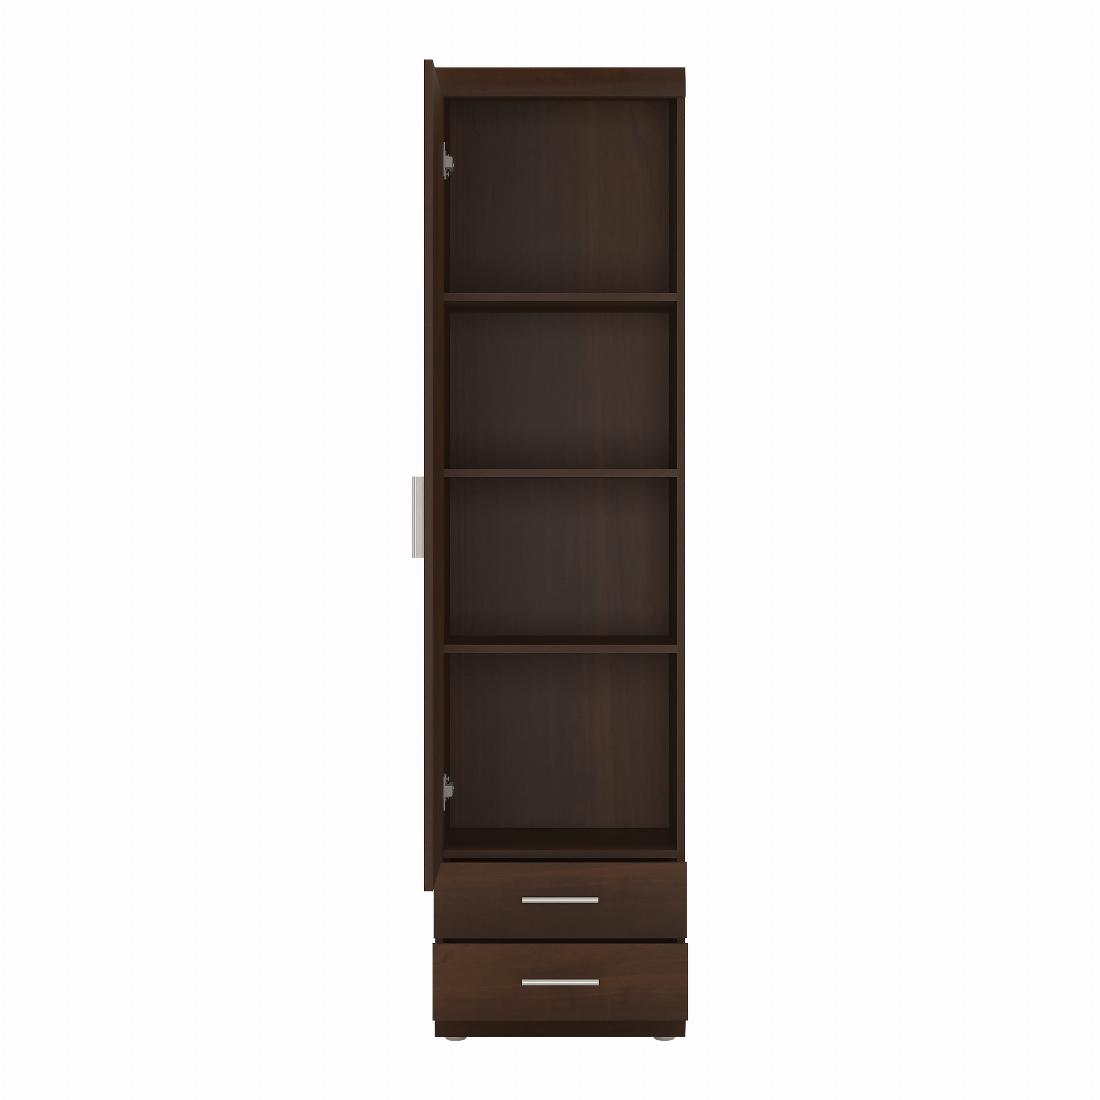 Imperial Tall 1 Door 2 Drawer Narrow Cabinet